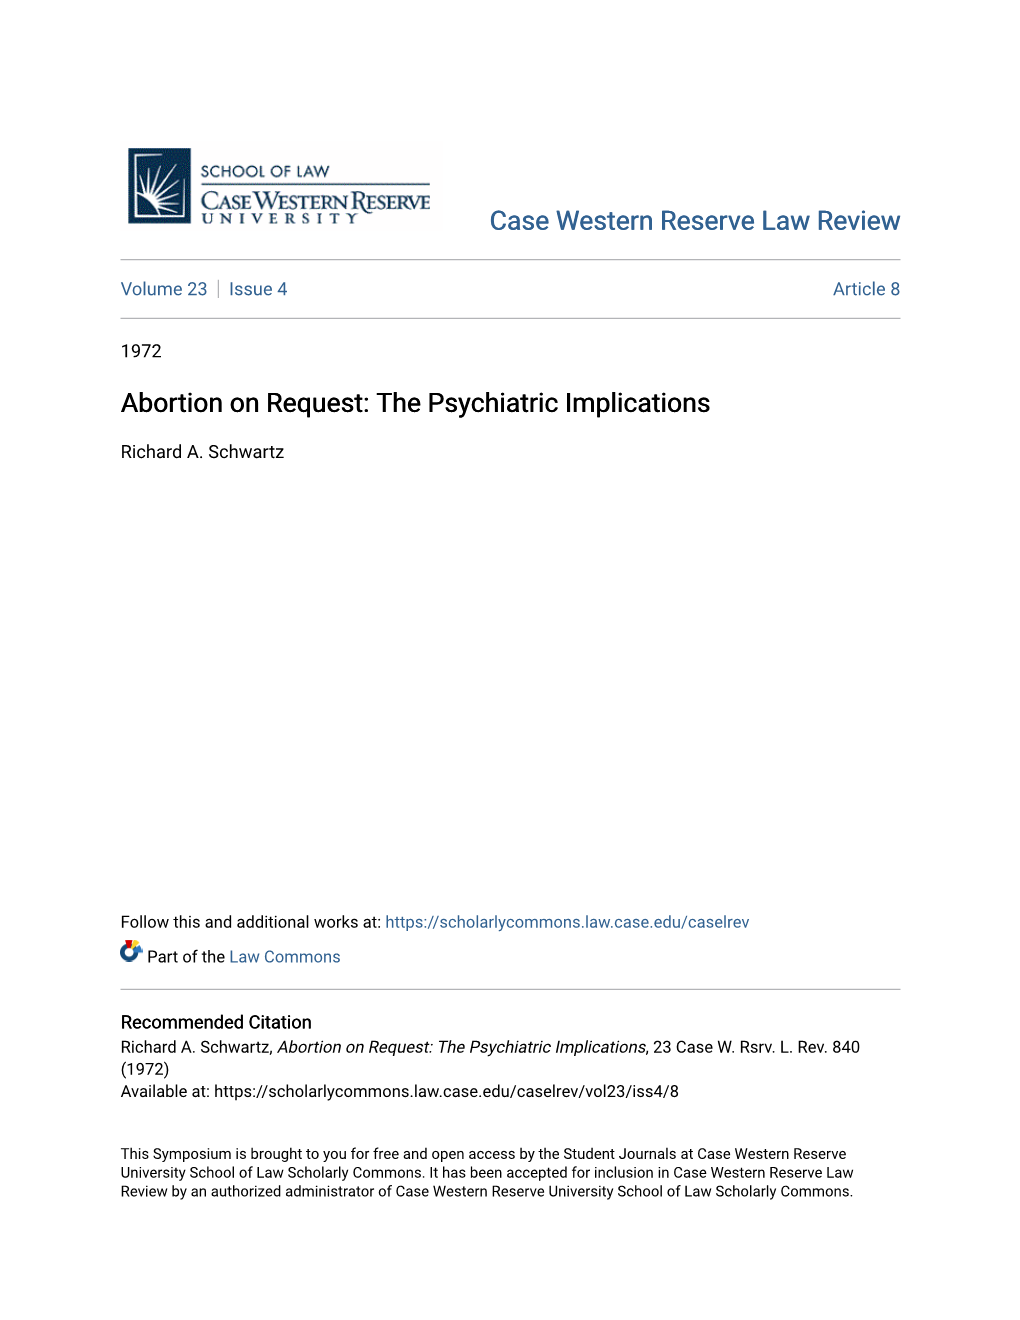 Abortion on Request: the Psychiatric Implications